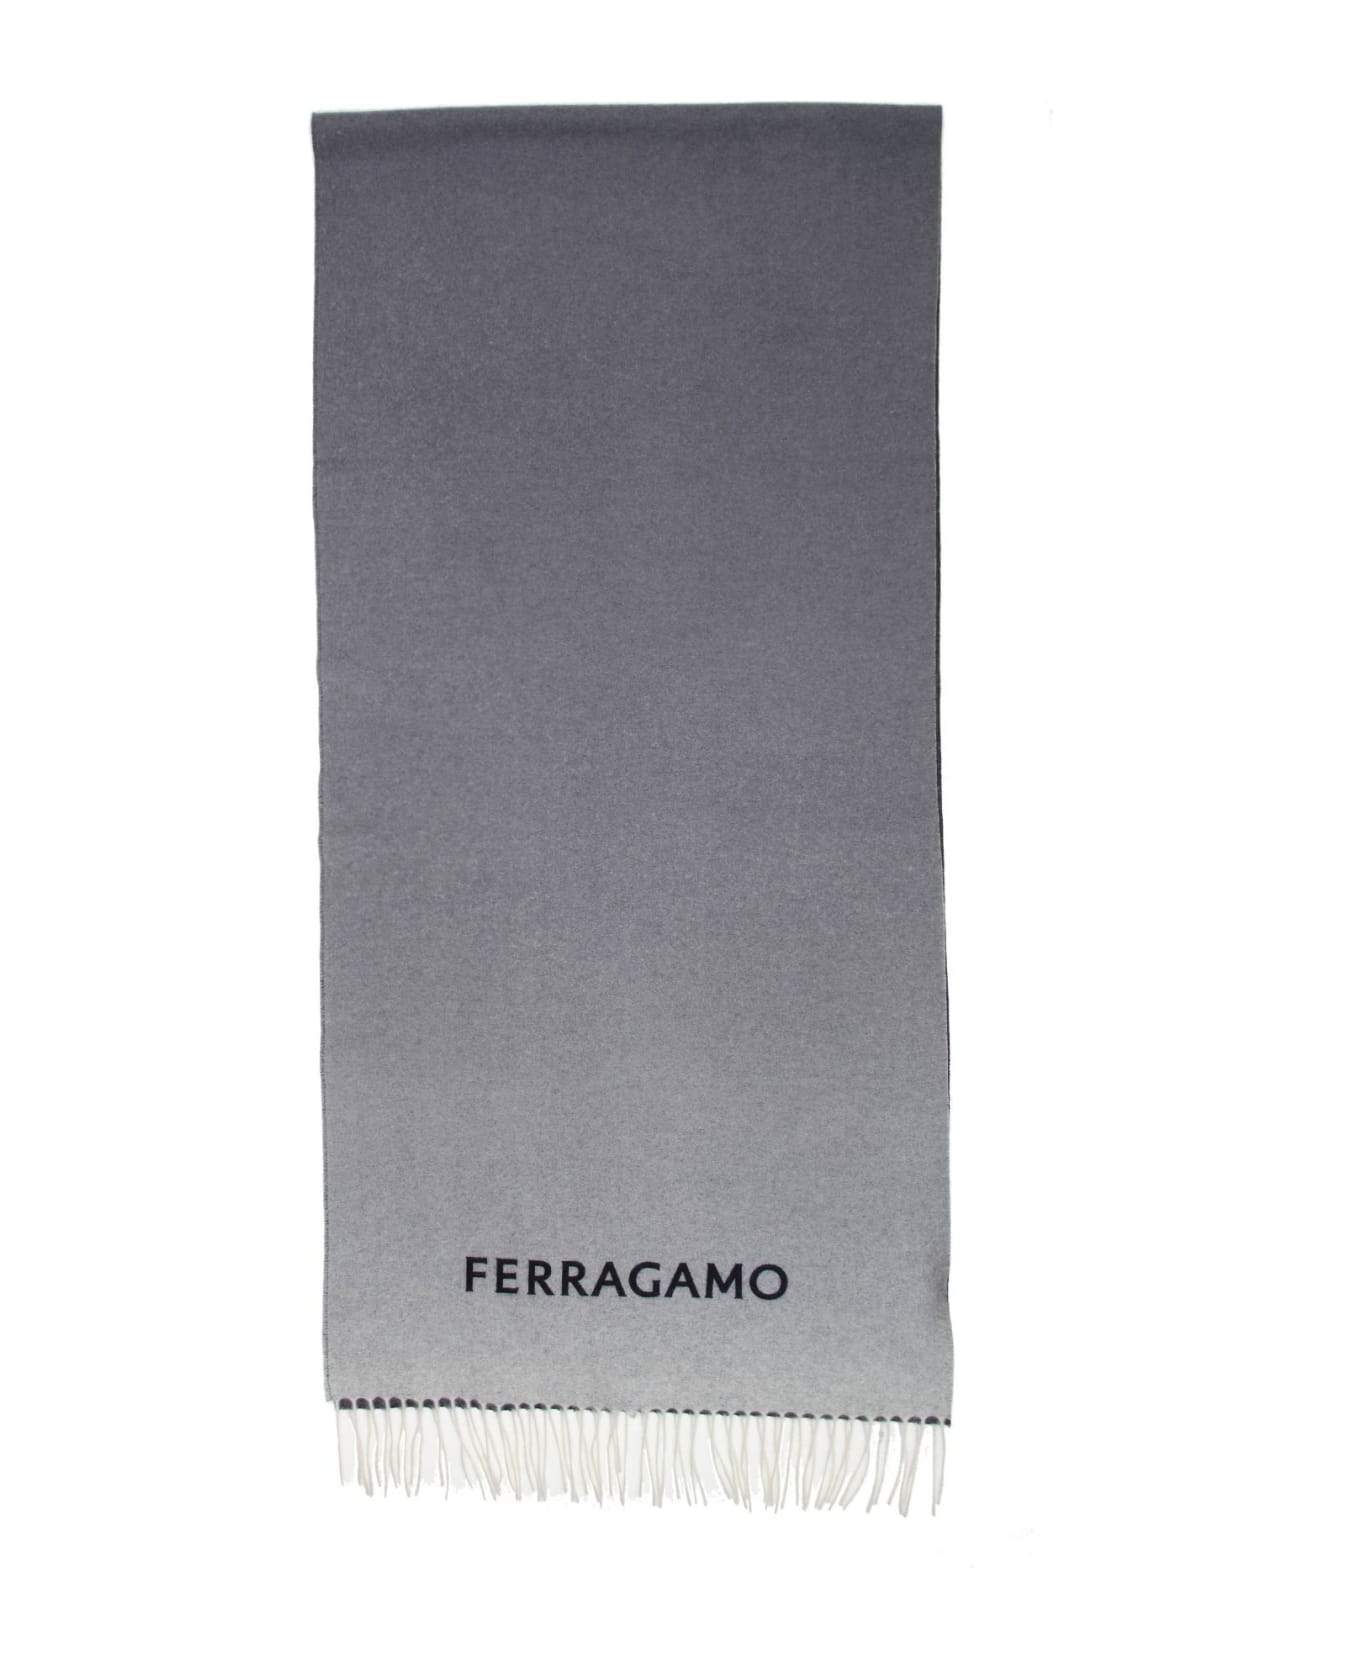 Ferragamo Scarf In Cashmere Nuance Shaded Effect - NAVY/BEIGE